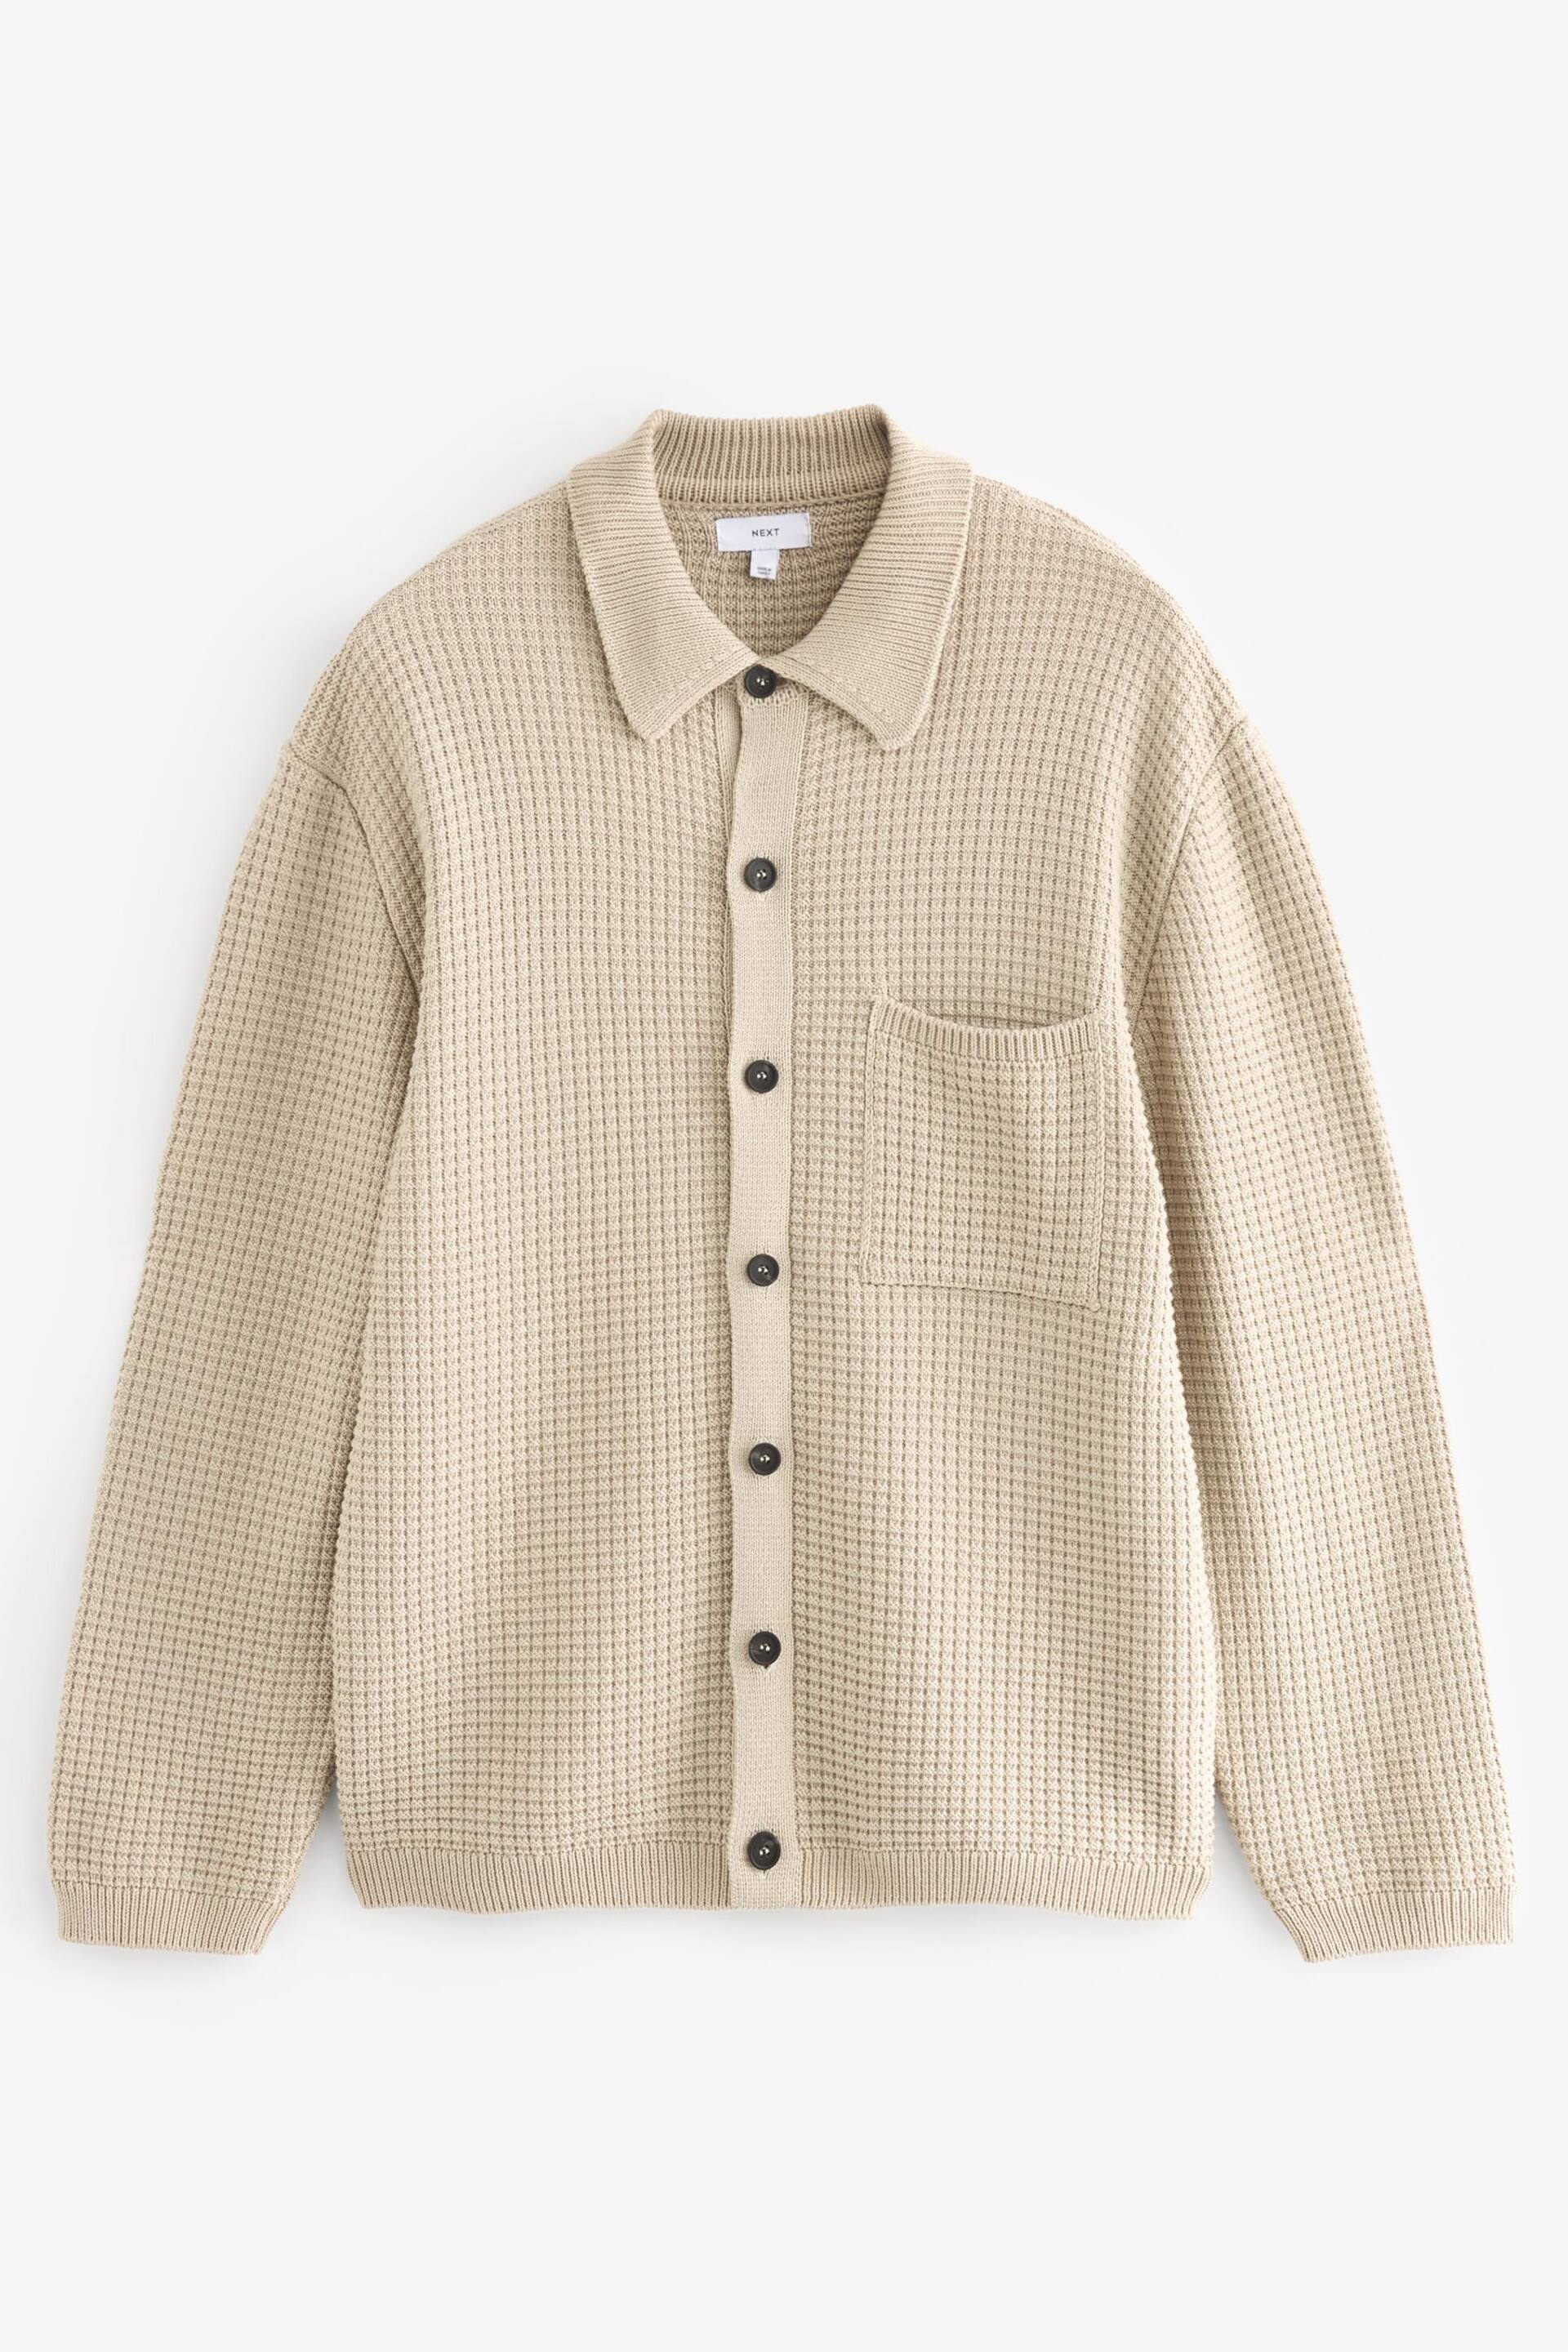 Neutral Textured Knitted Relaxed Shacket - Image 6 of 8